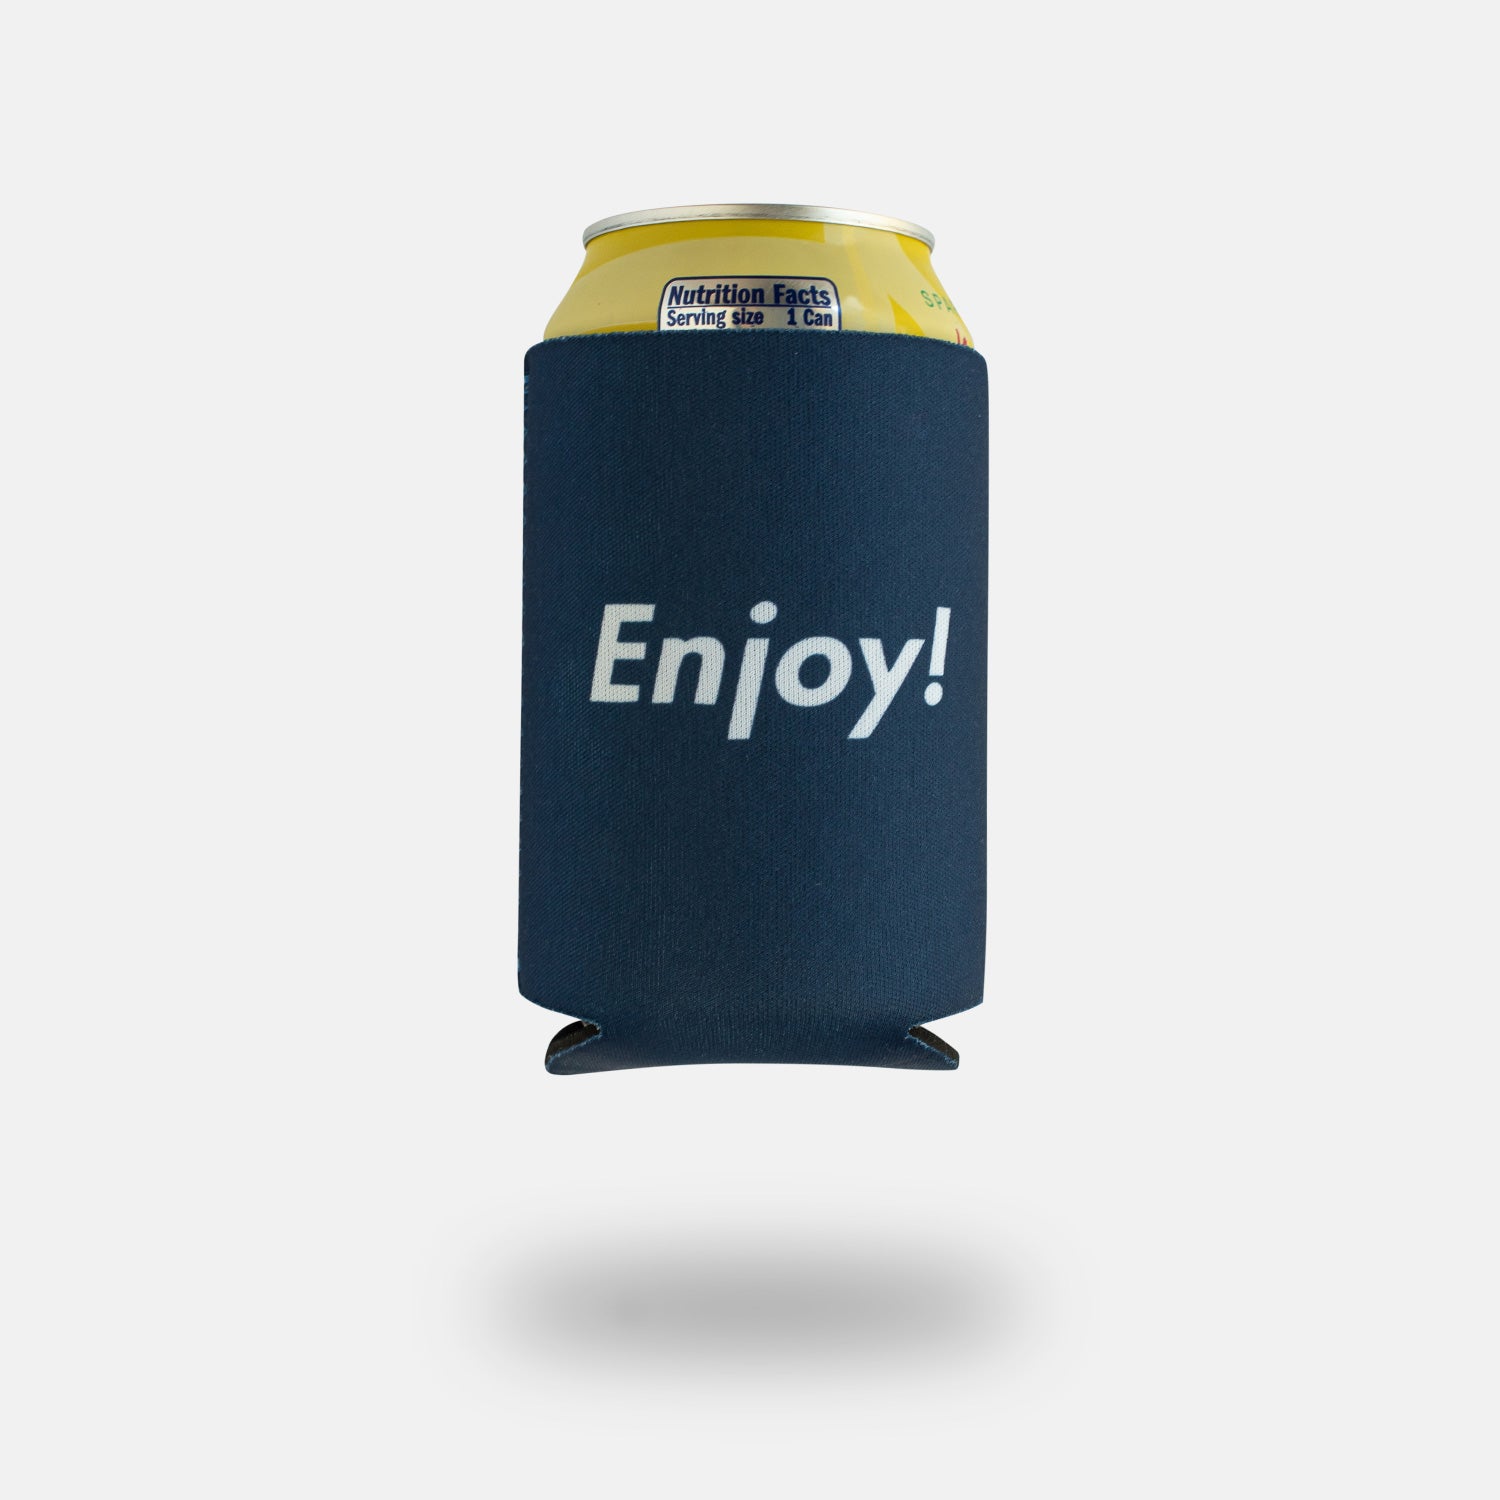 Stay Low and Go Beer Koozie